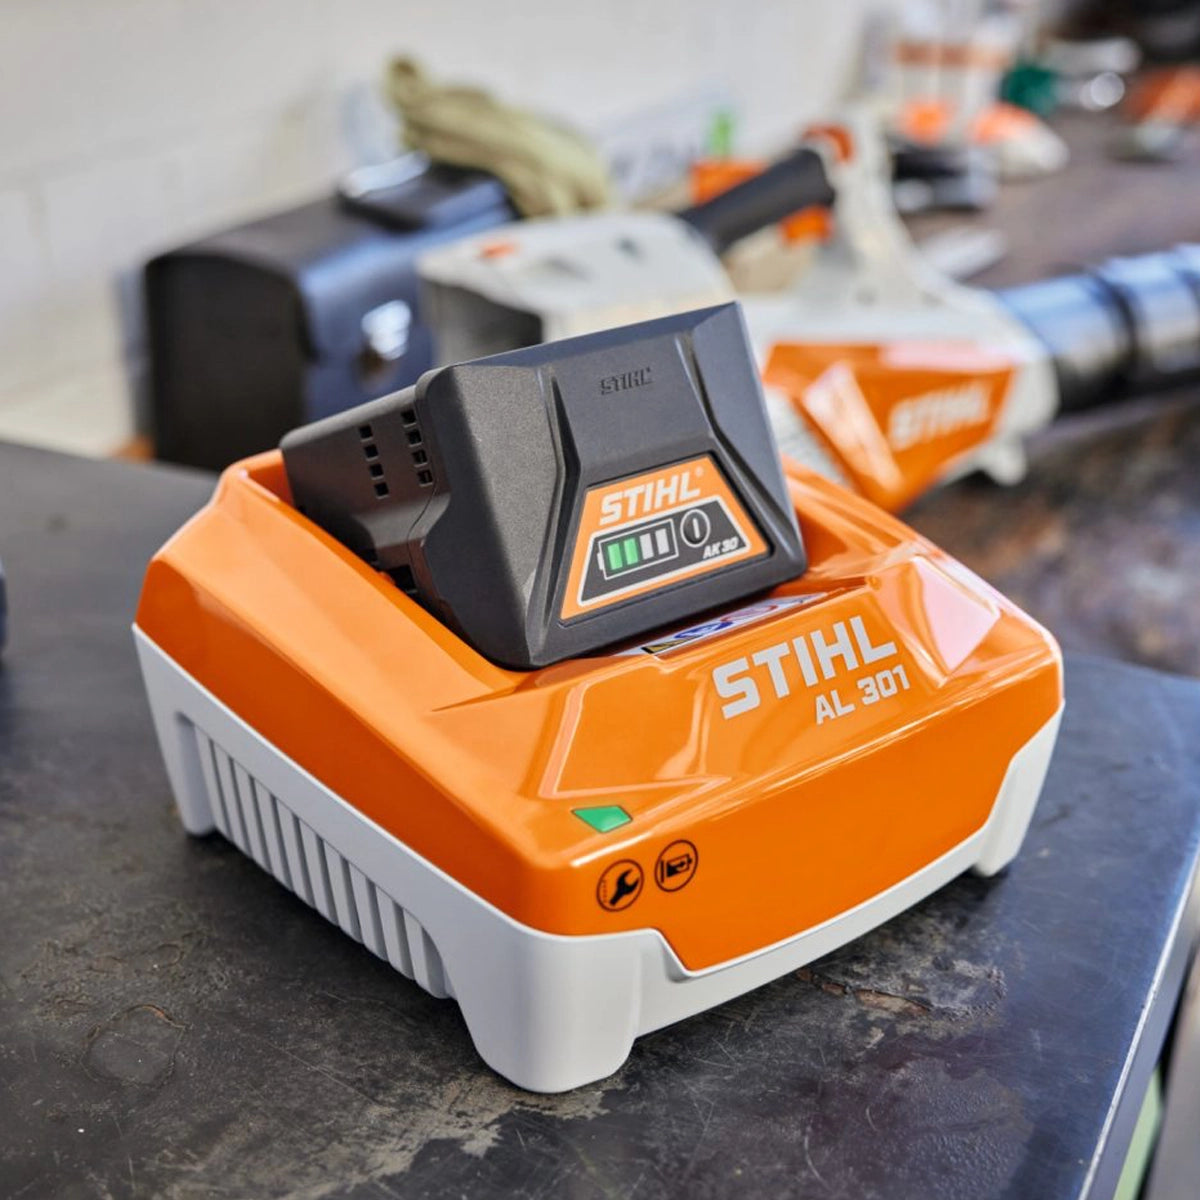 STIHL AL 301 Quick Battery Charger